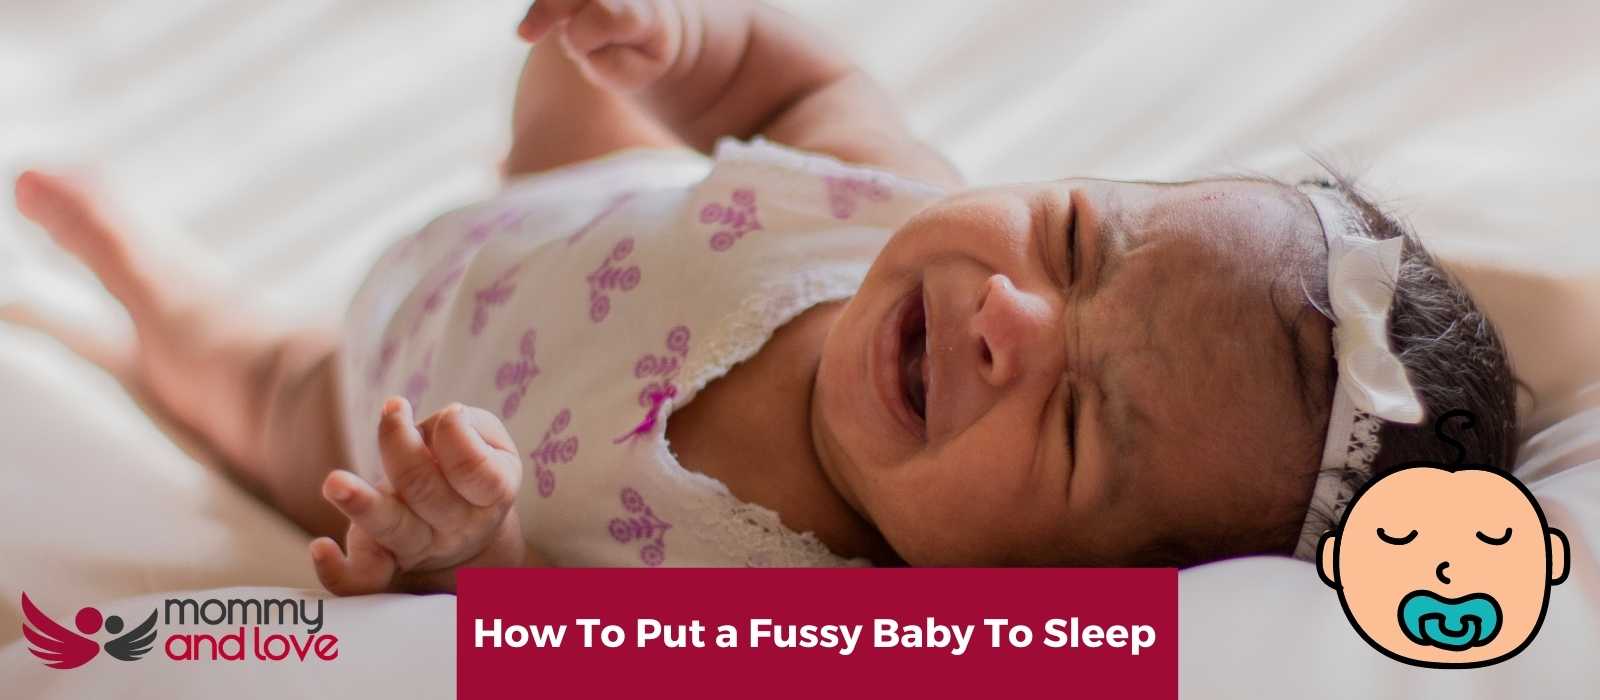 How To Put a Fussy Baby To Sleep 